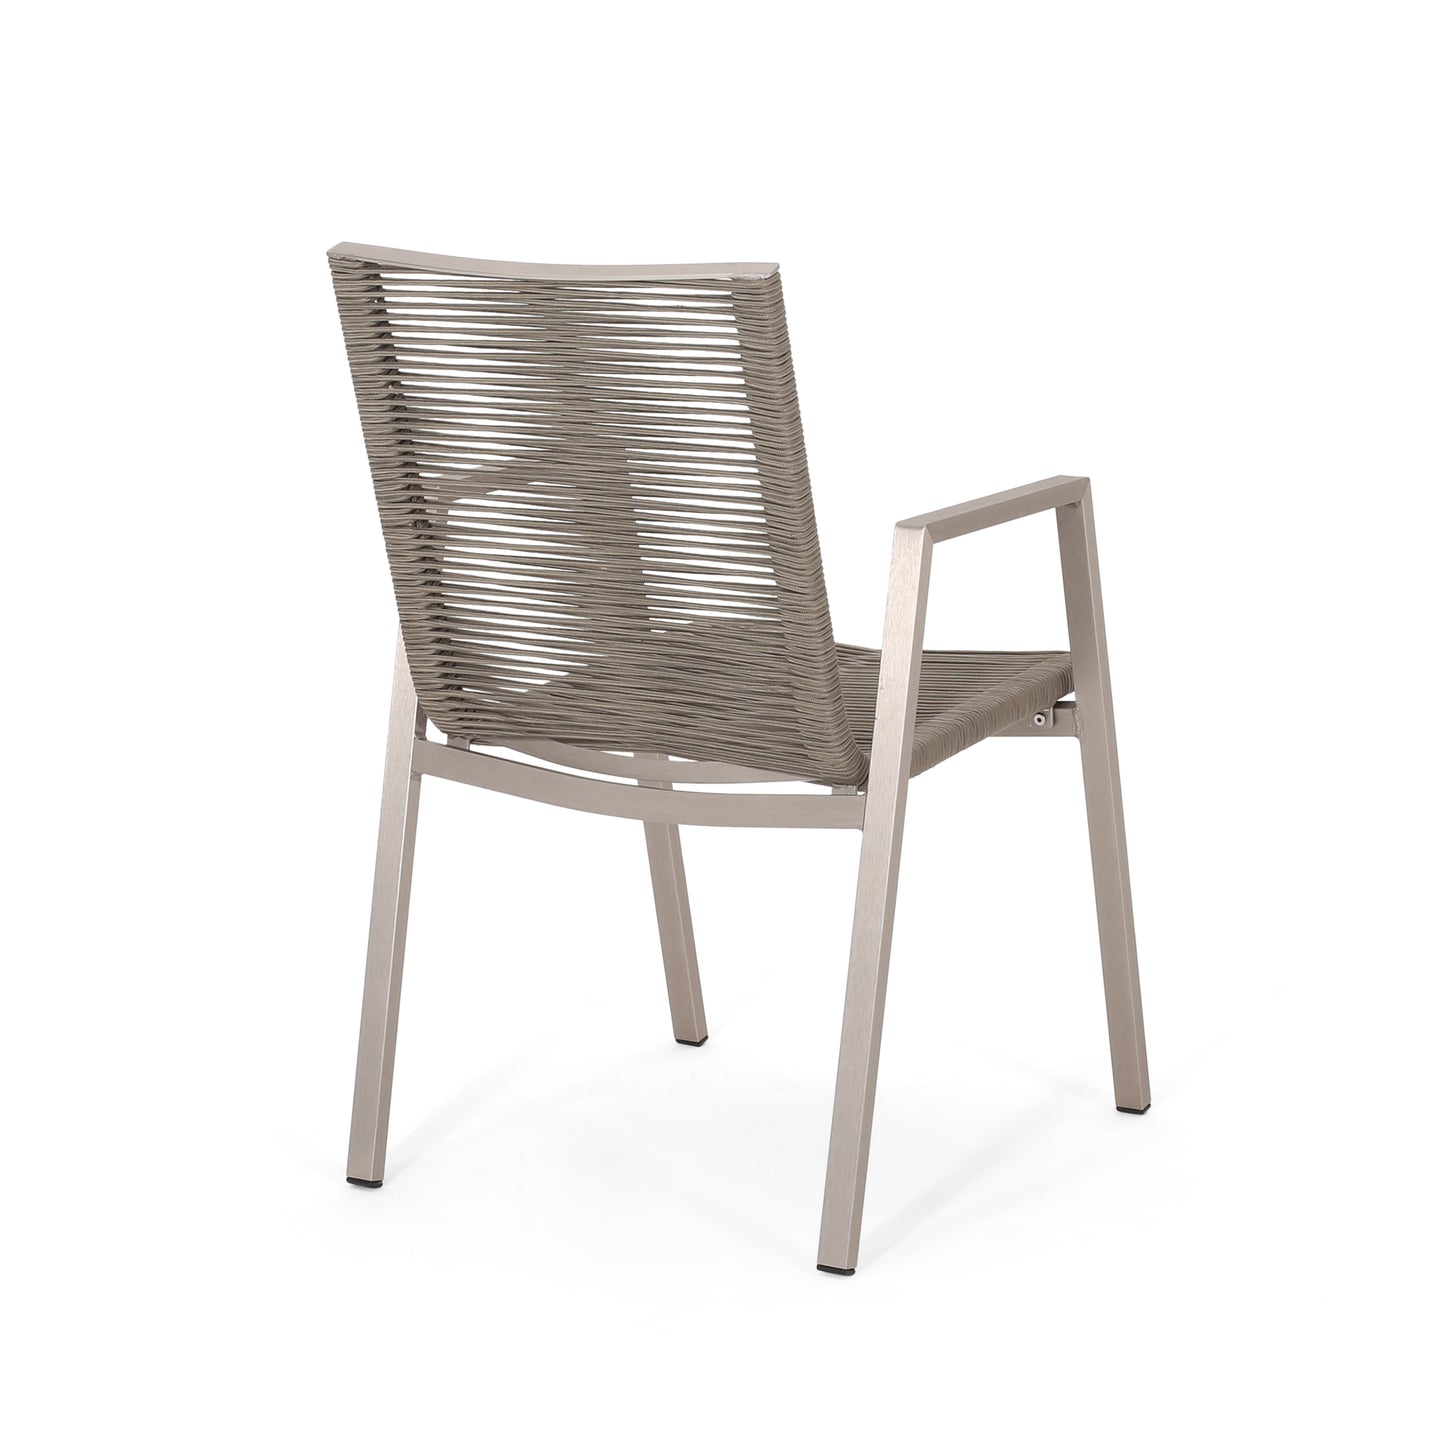 Kalli Outdoor Modern Aluminum Dining Chair with Rope Seat (Set of 2)